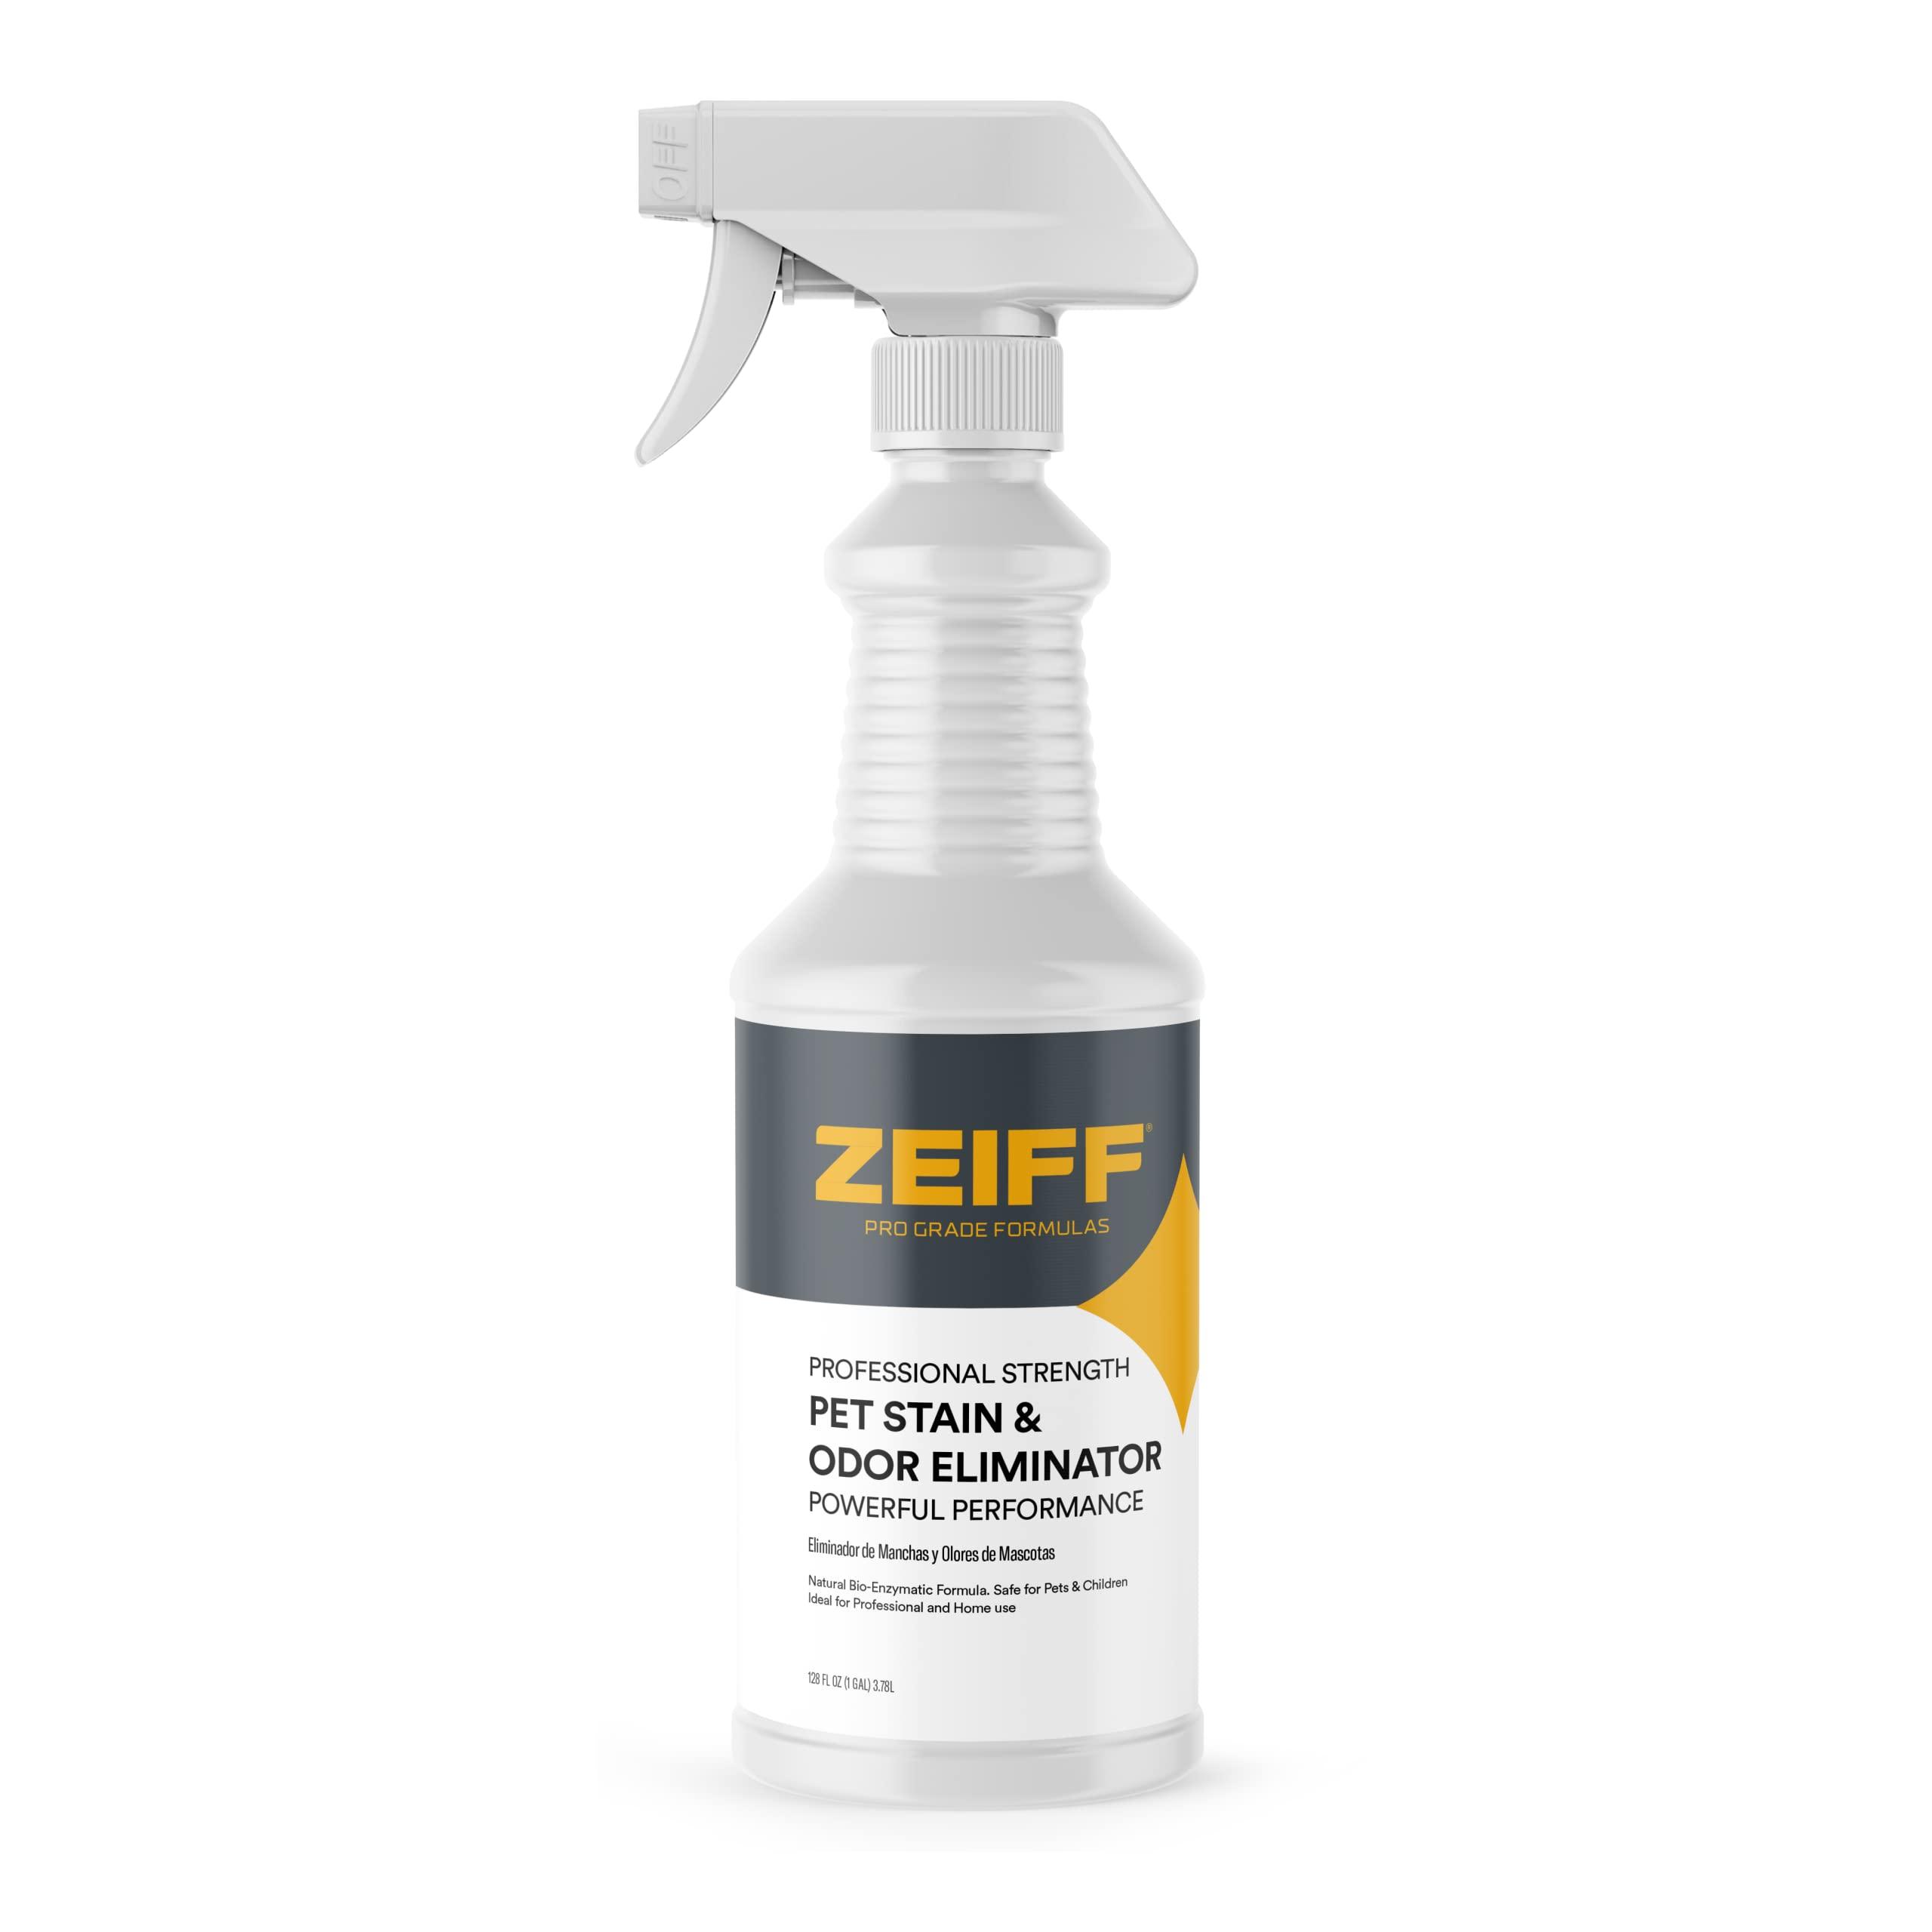 Zeiff Pet Stain and Odor Remover - Pet Odor Eliminator for Home and Professional Use - Pet Urine Enzyme Cleaner to Break Up Tough Stains - Carpet Stain Remover for Dog Urine and Cat Pee, Feces, Fluids